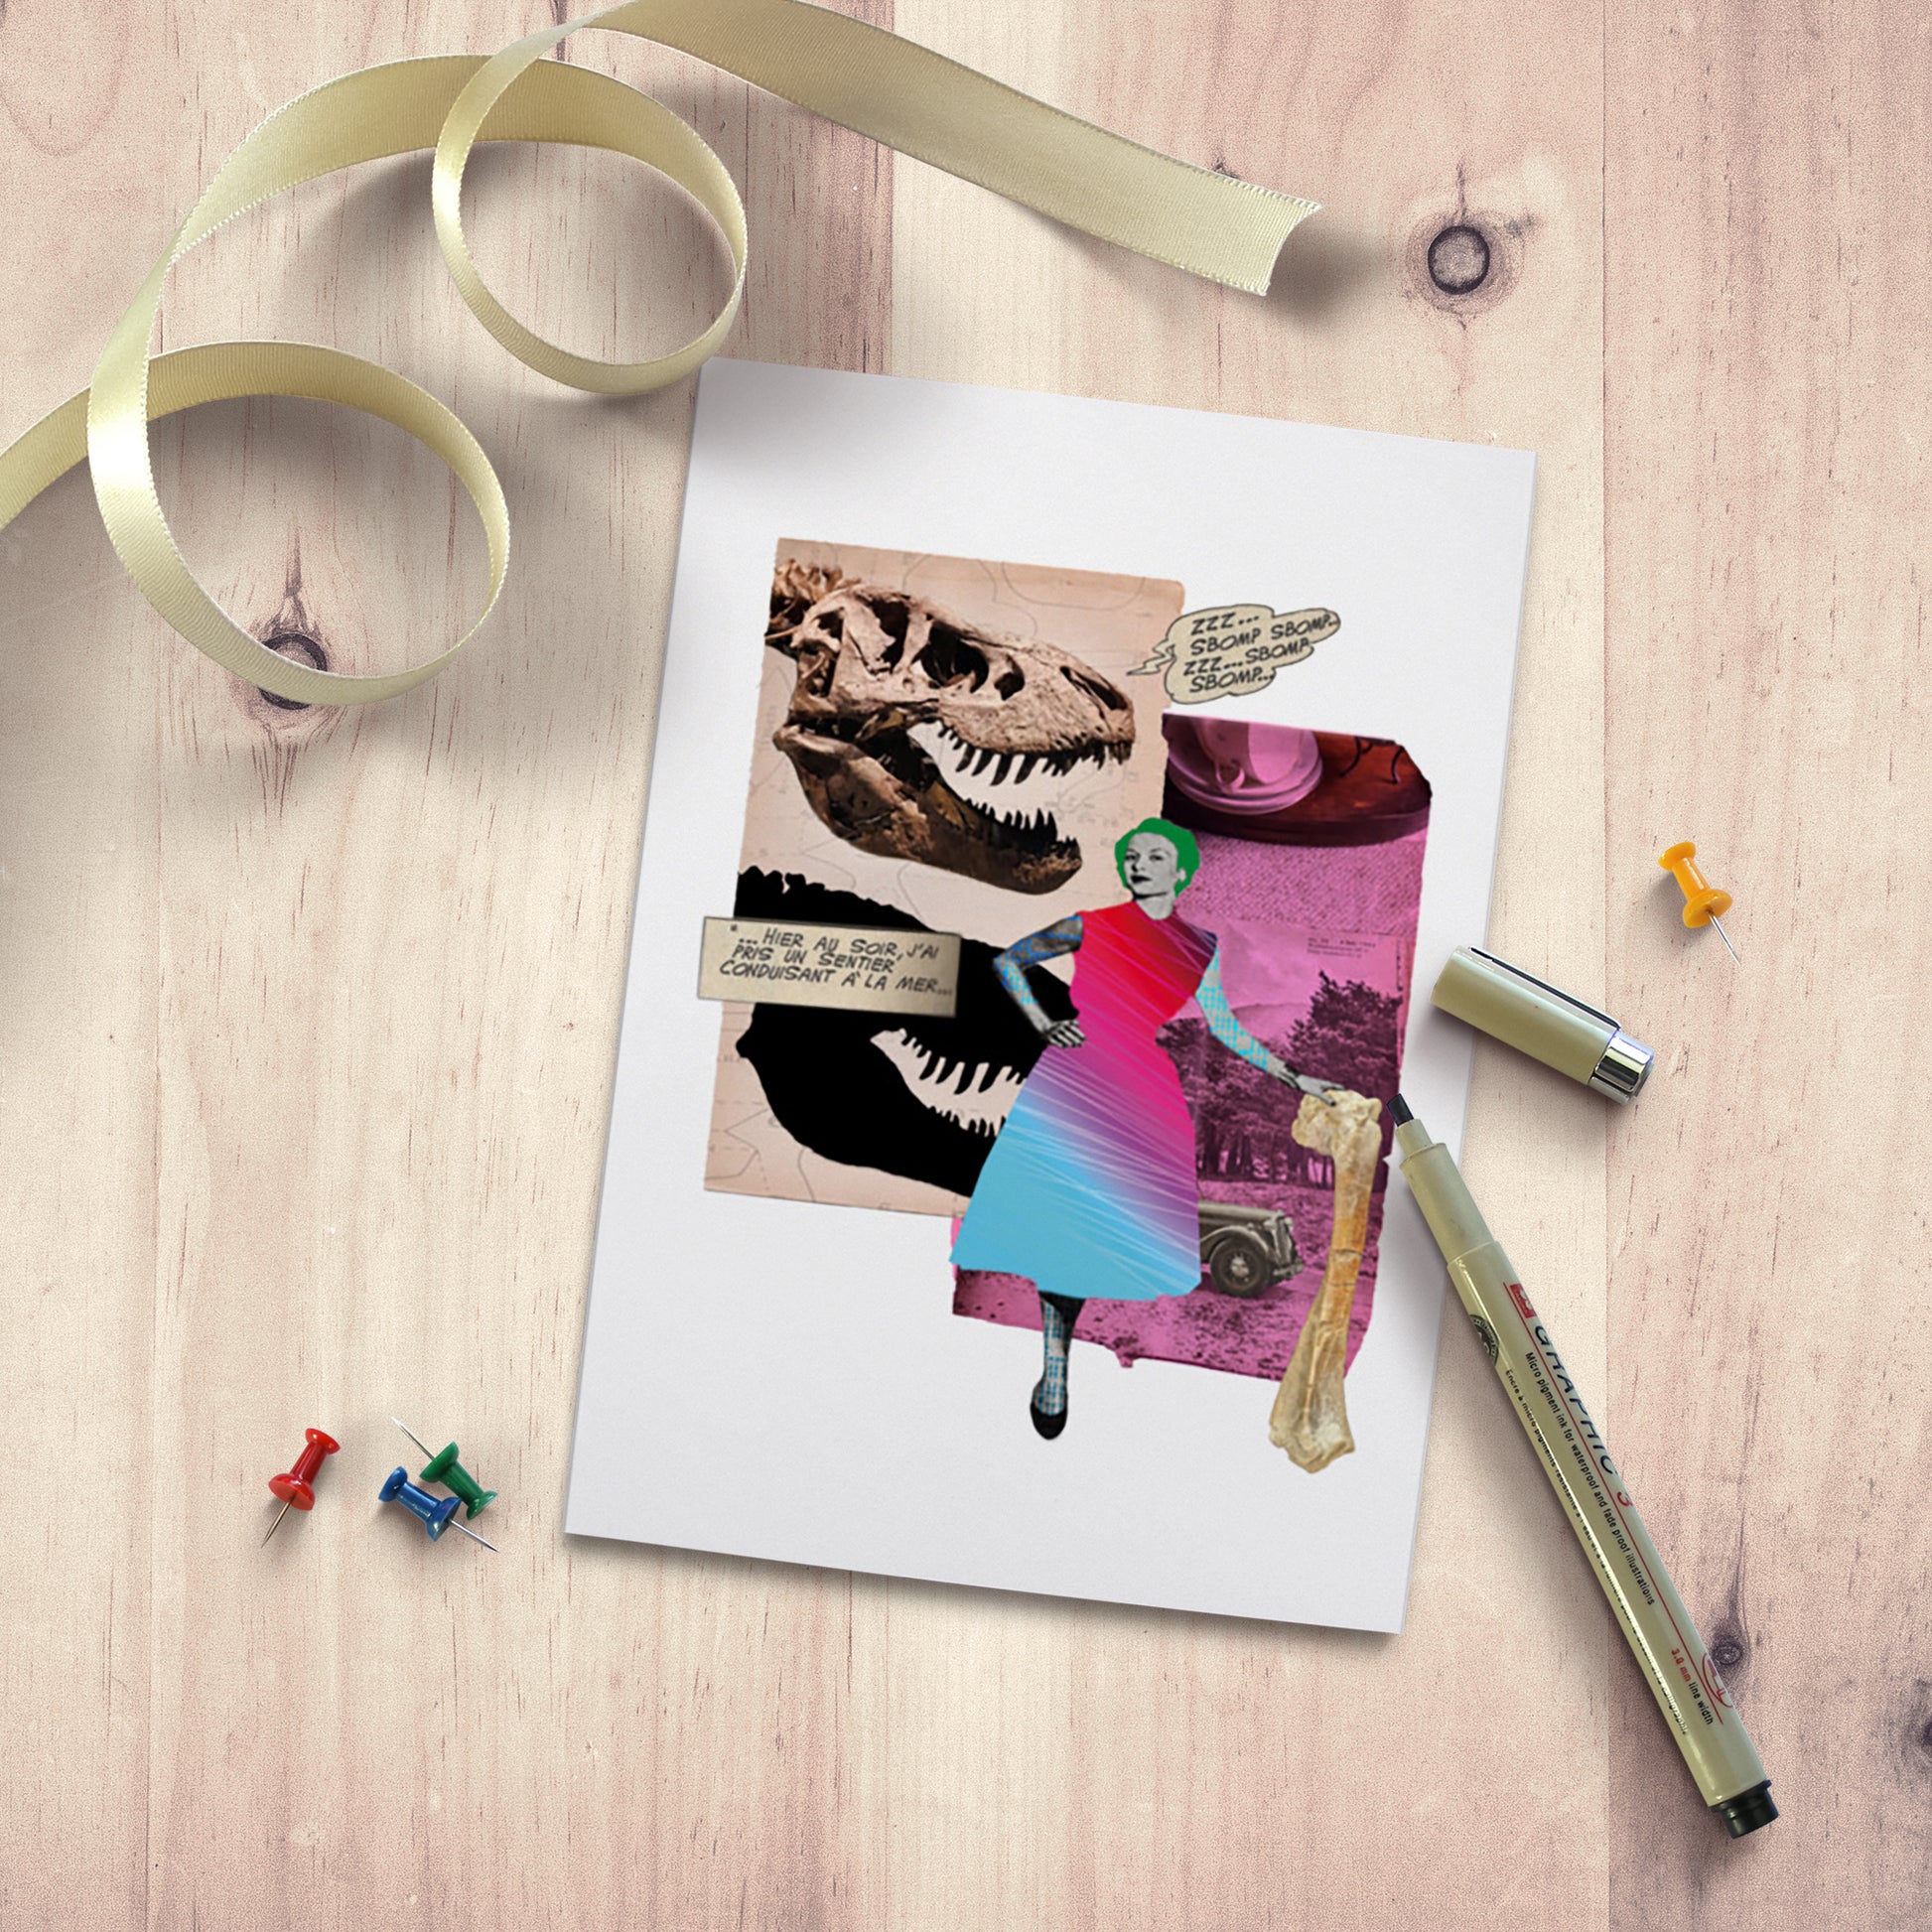 Trex skeleton and Woman Card - Modern Vintage Artist Collage - Dinosaur lover Mini poster - Science Home decor